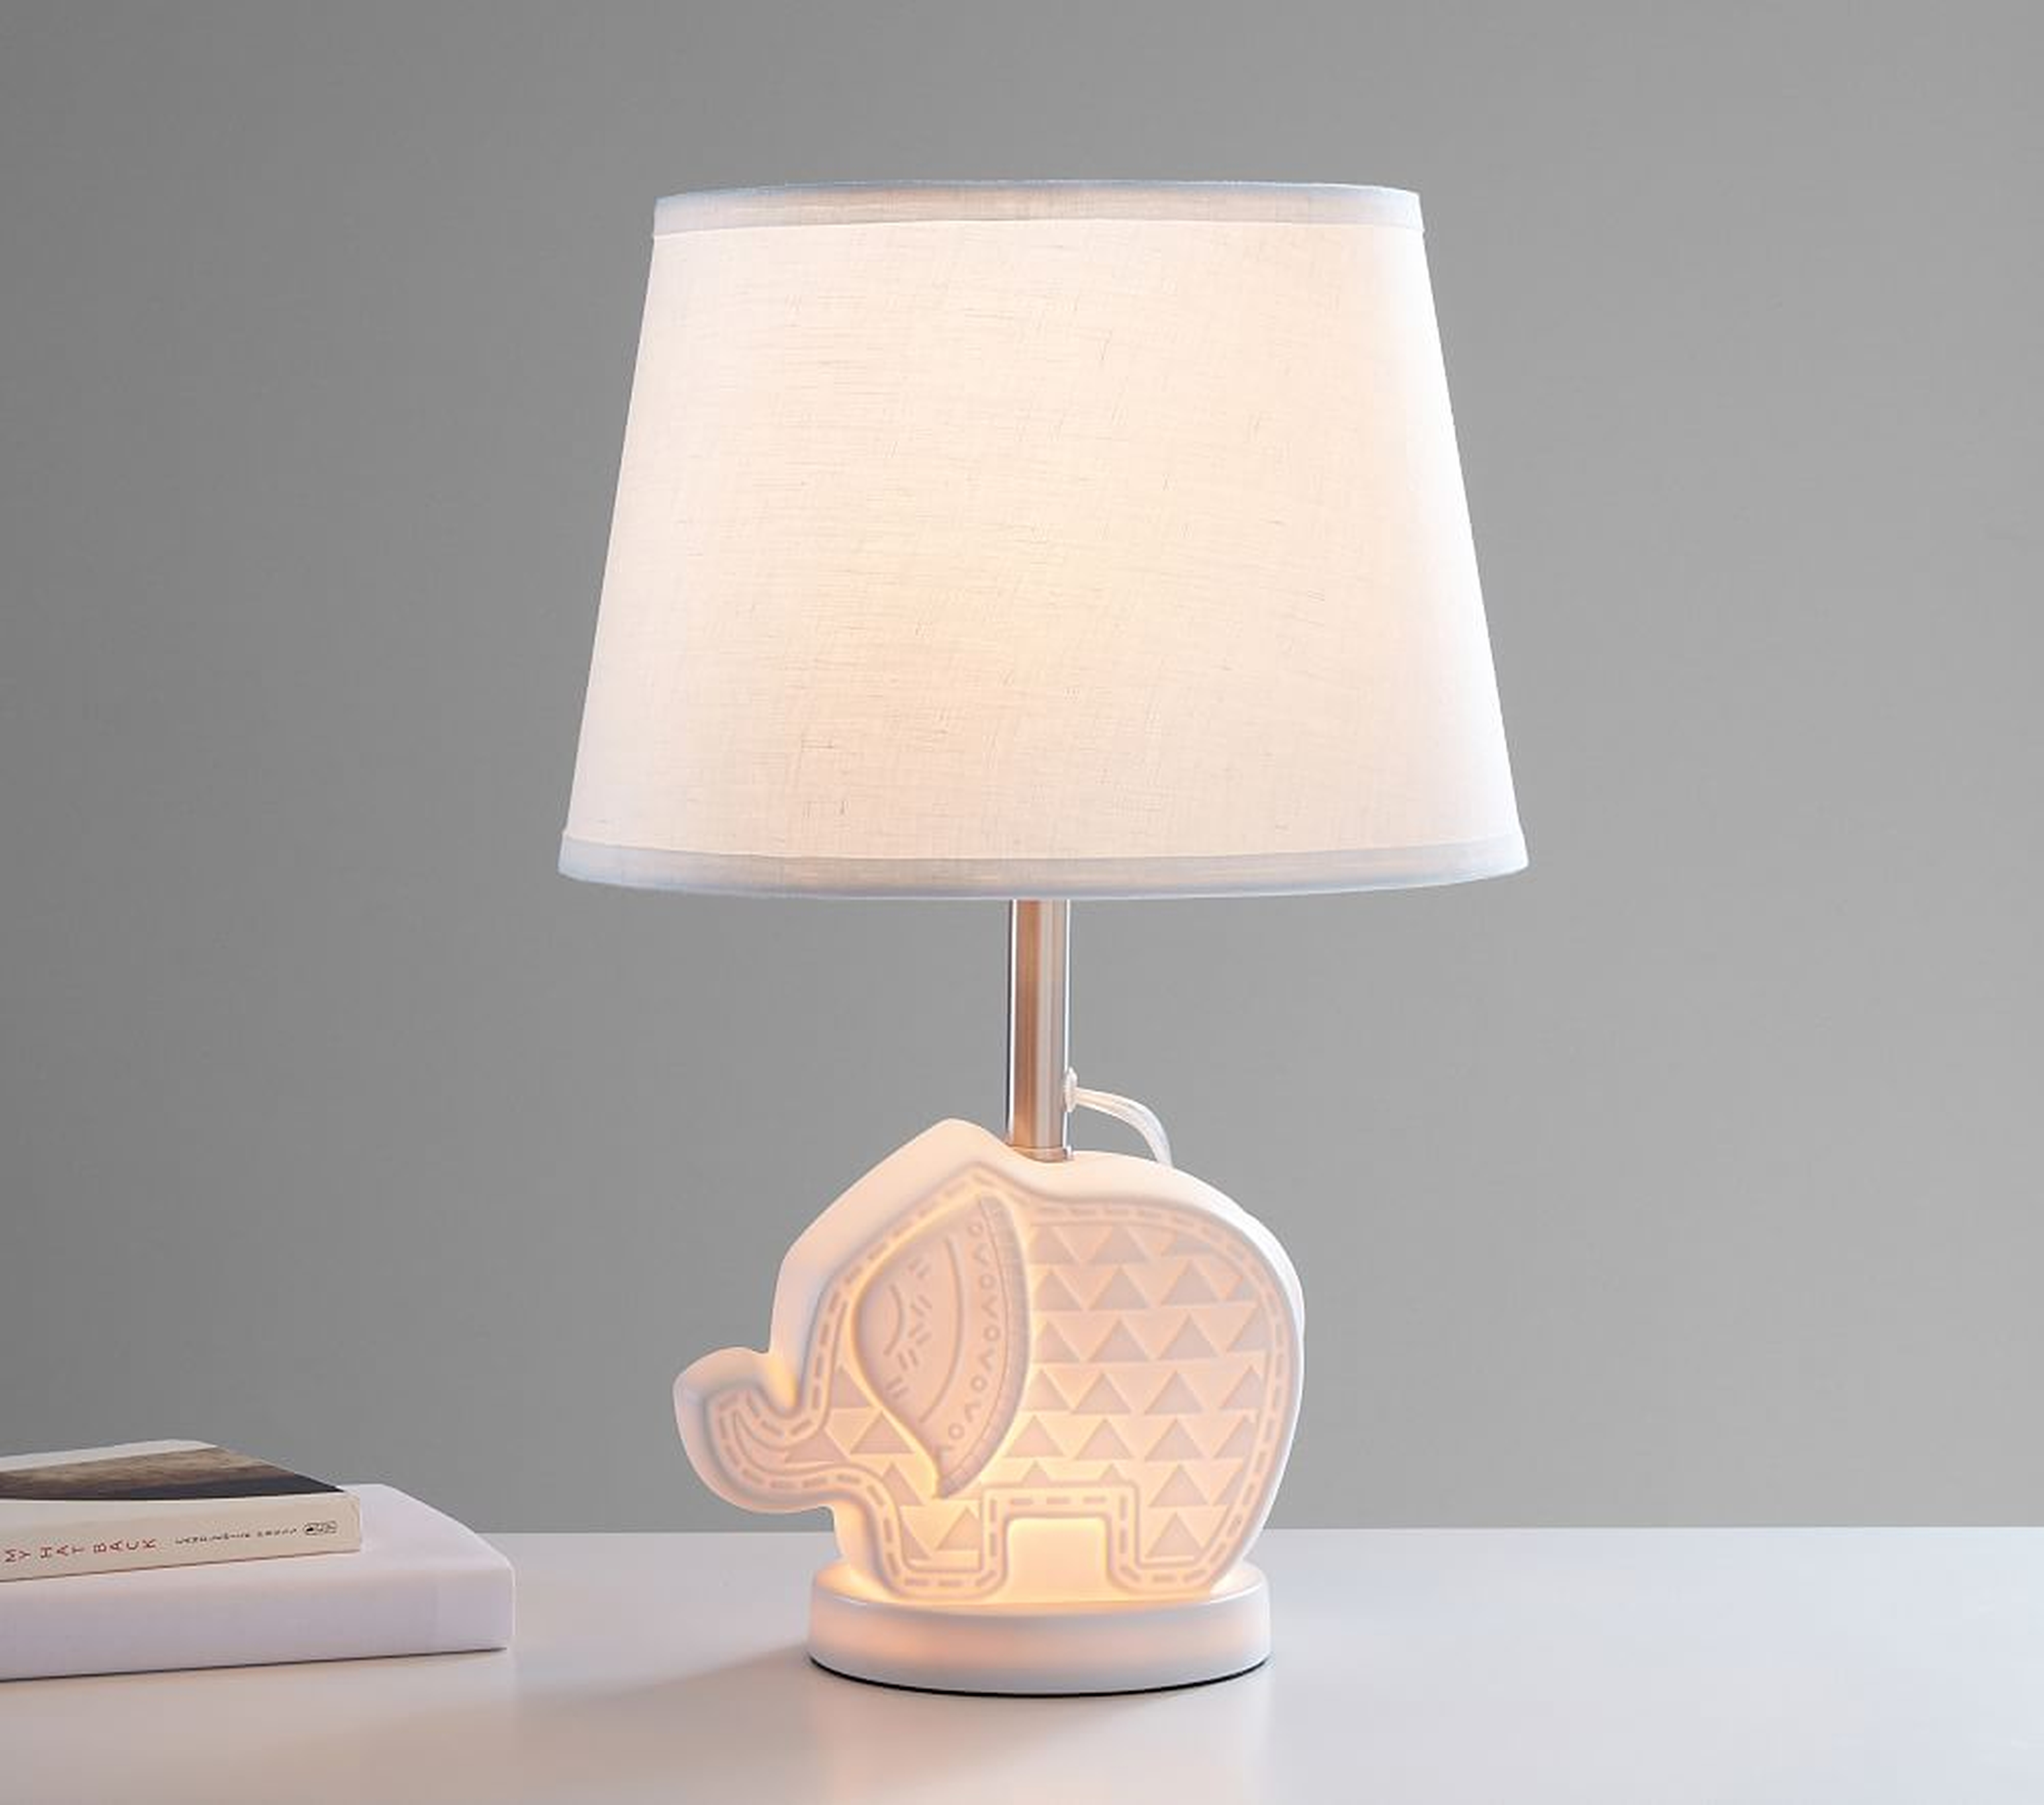 Embossed Bisque Elephant 3-Way Lamp - Pottery Barn Kids